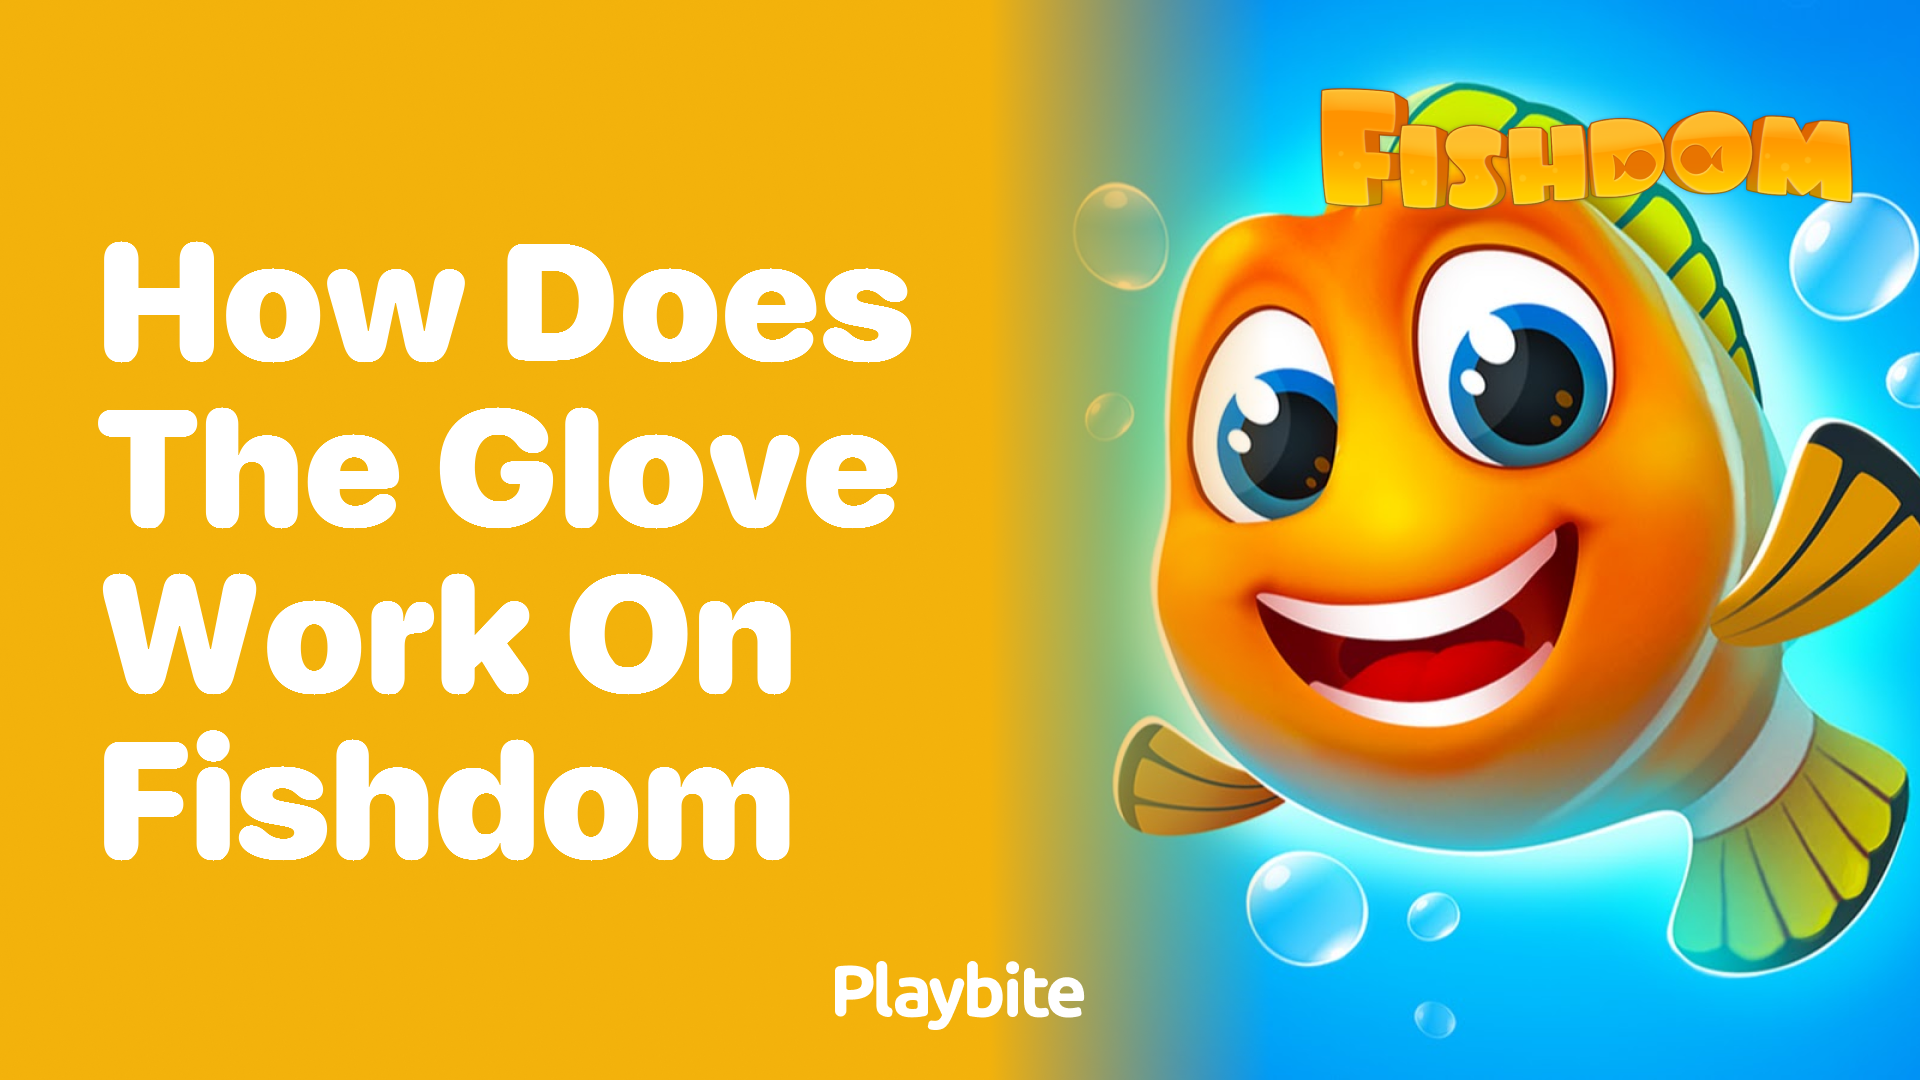 How Does the Glove Work in Fishdom?